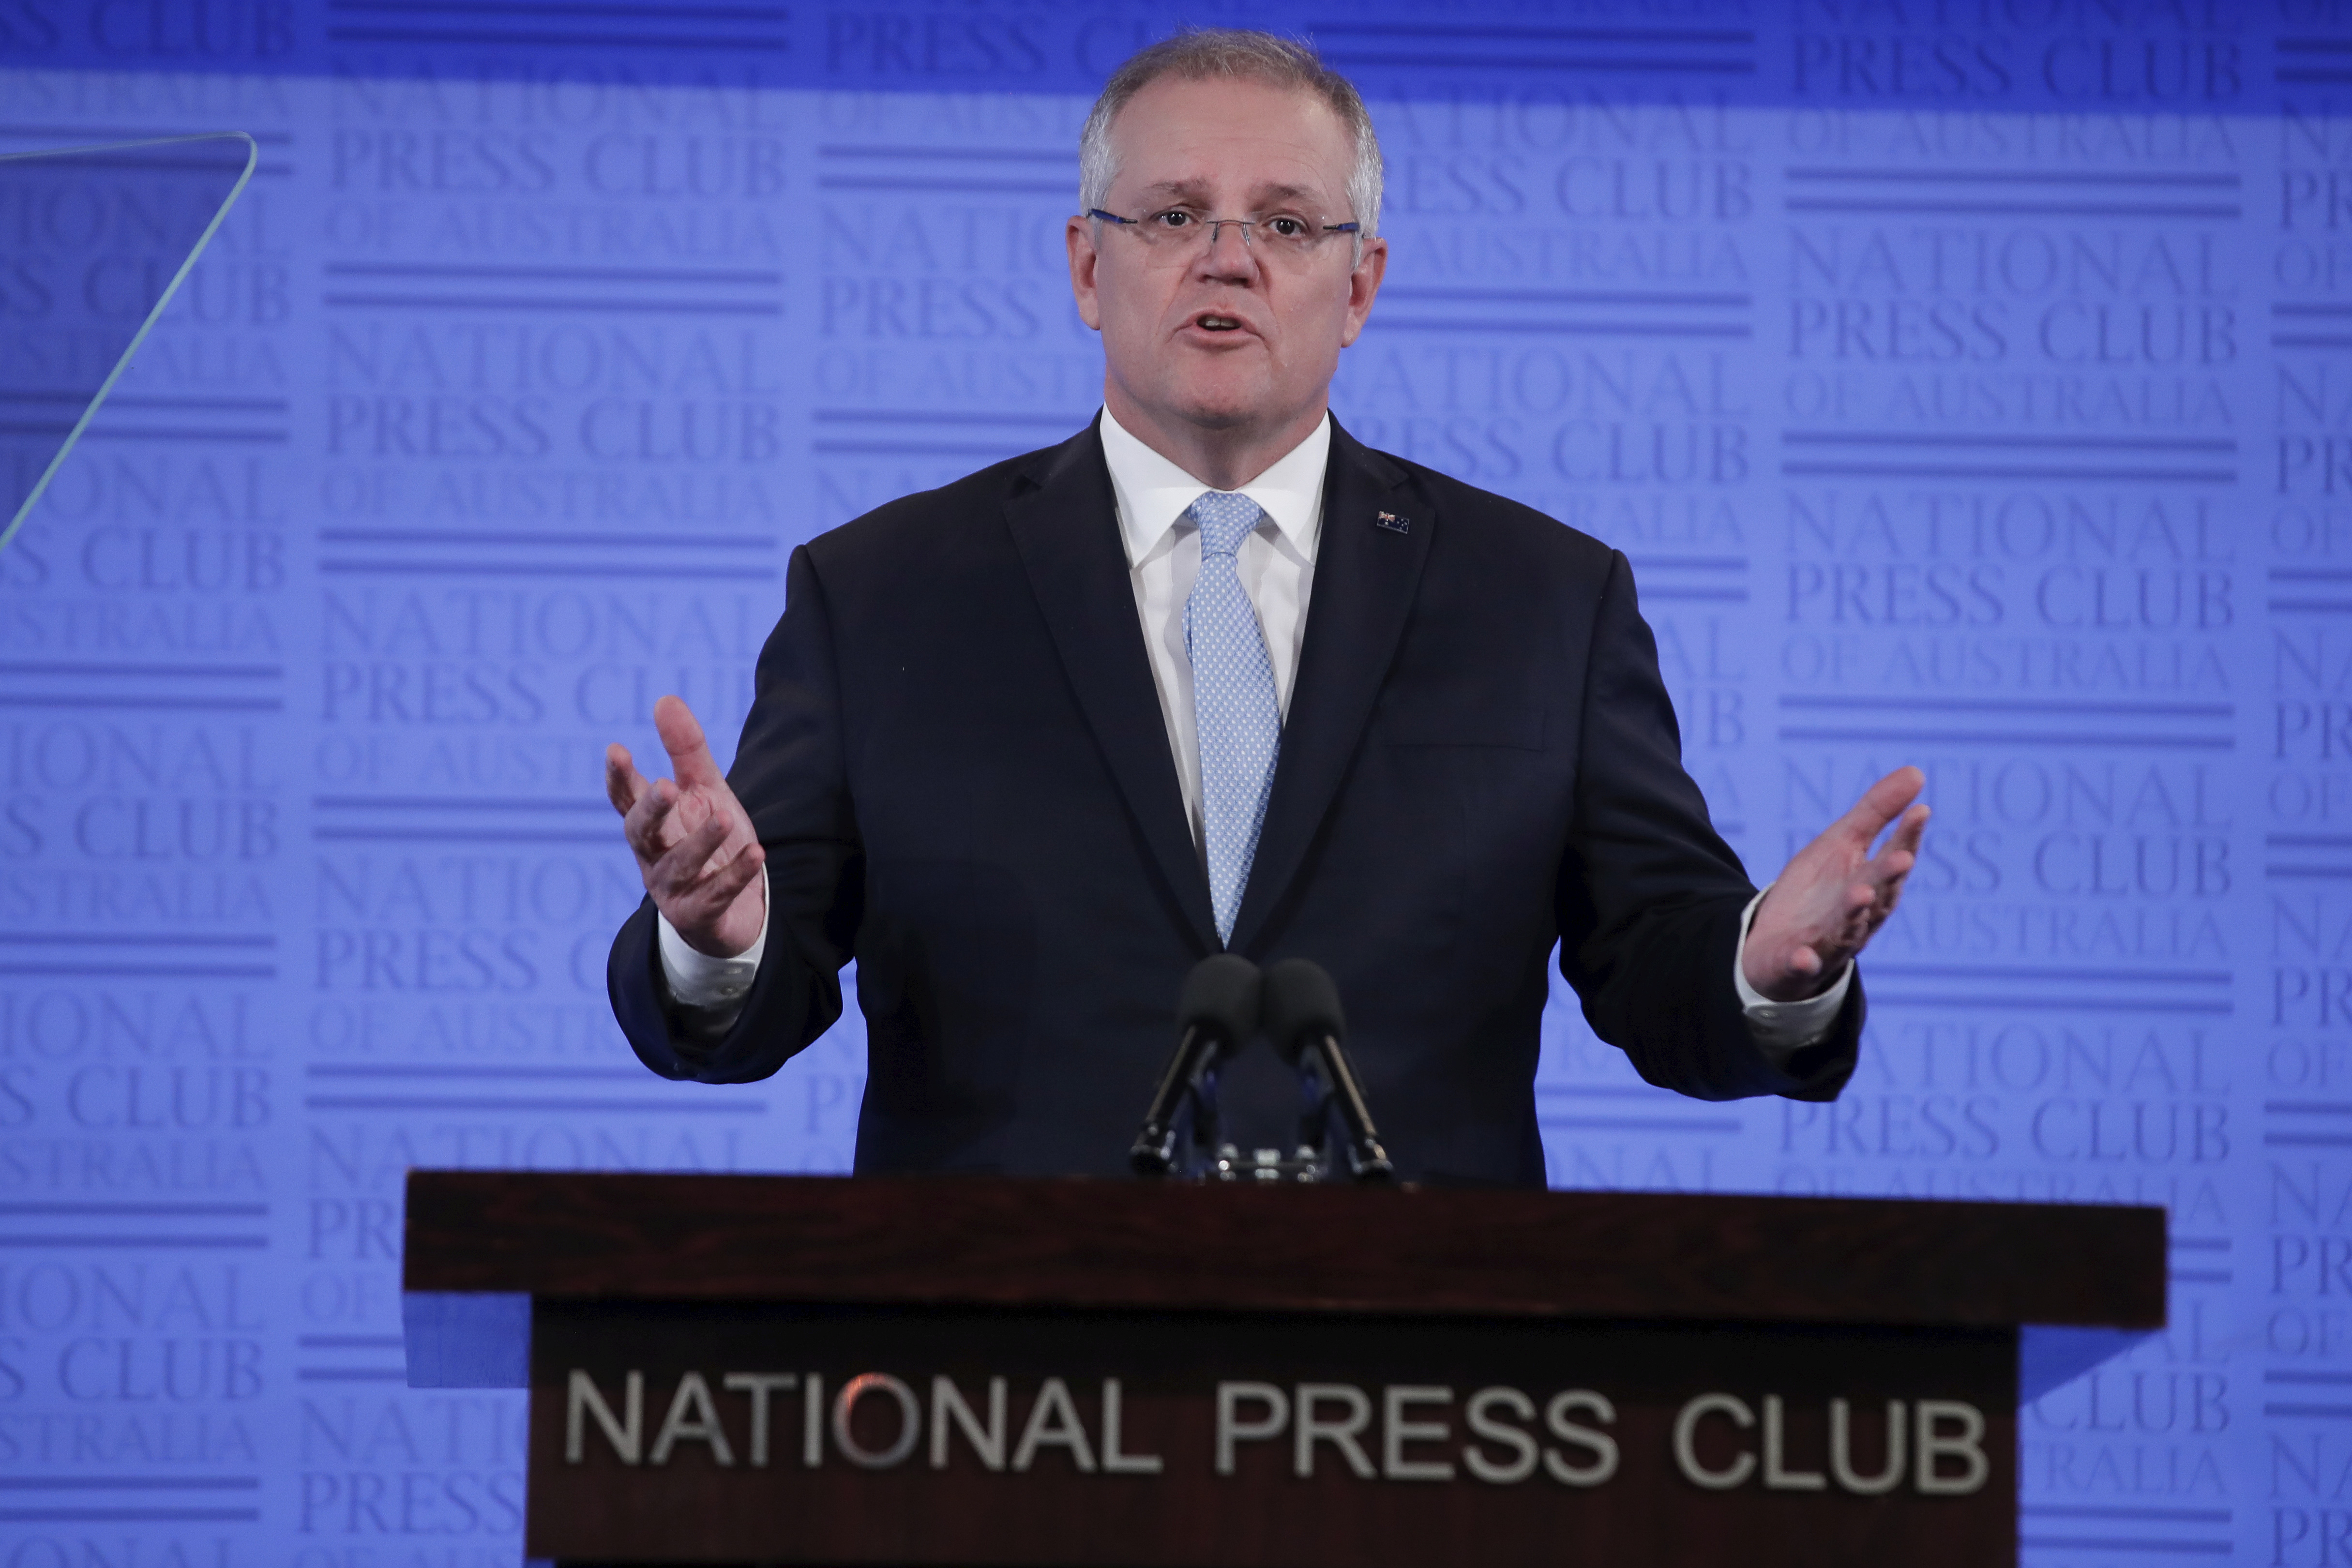 Prime Minister Scott Morrison during his address to the National Press Club of Australia, in Canberra 